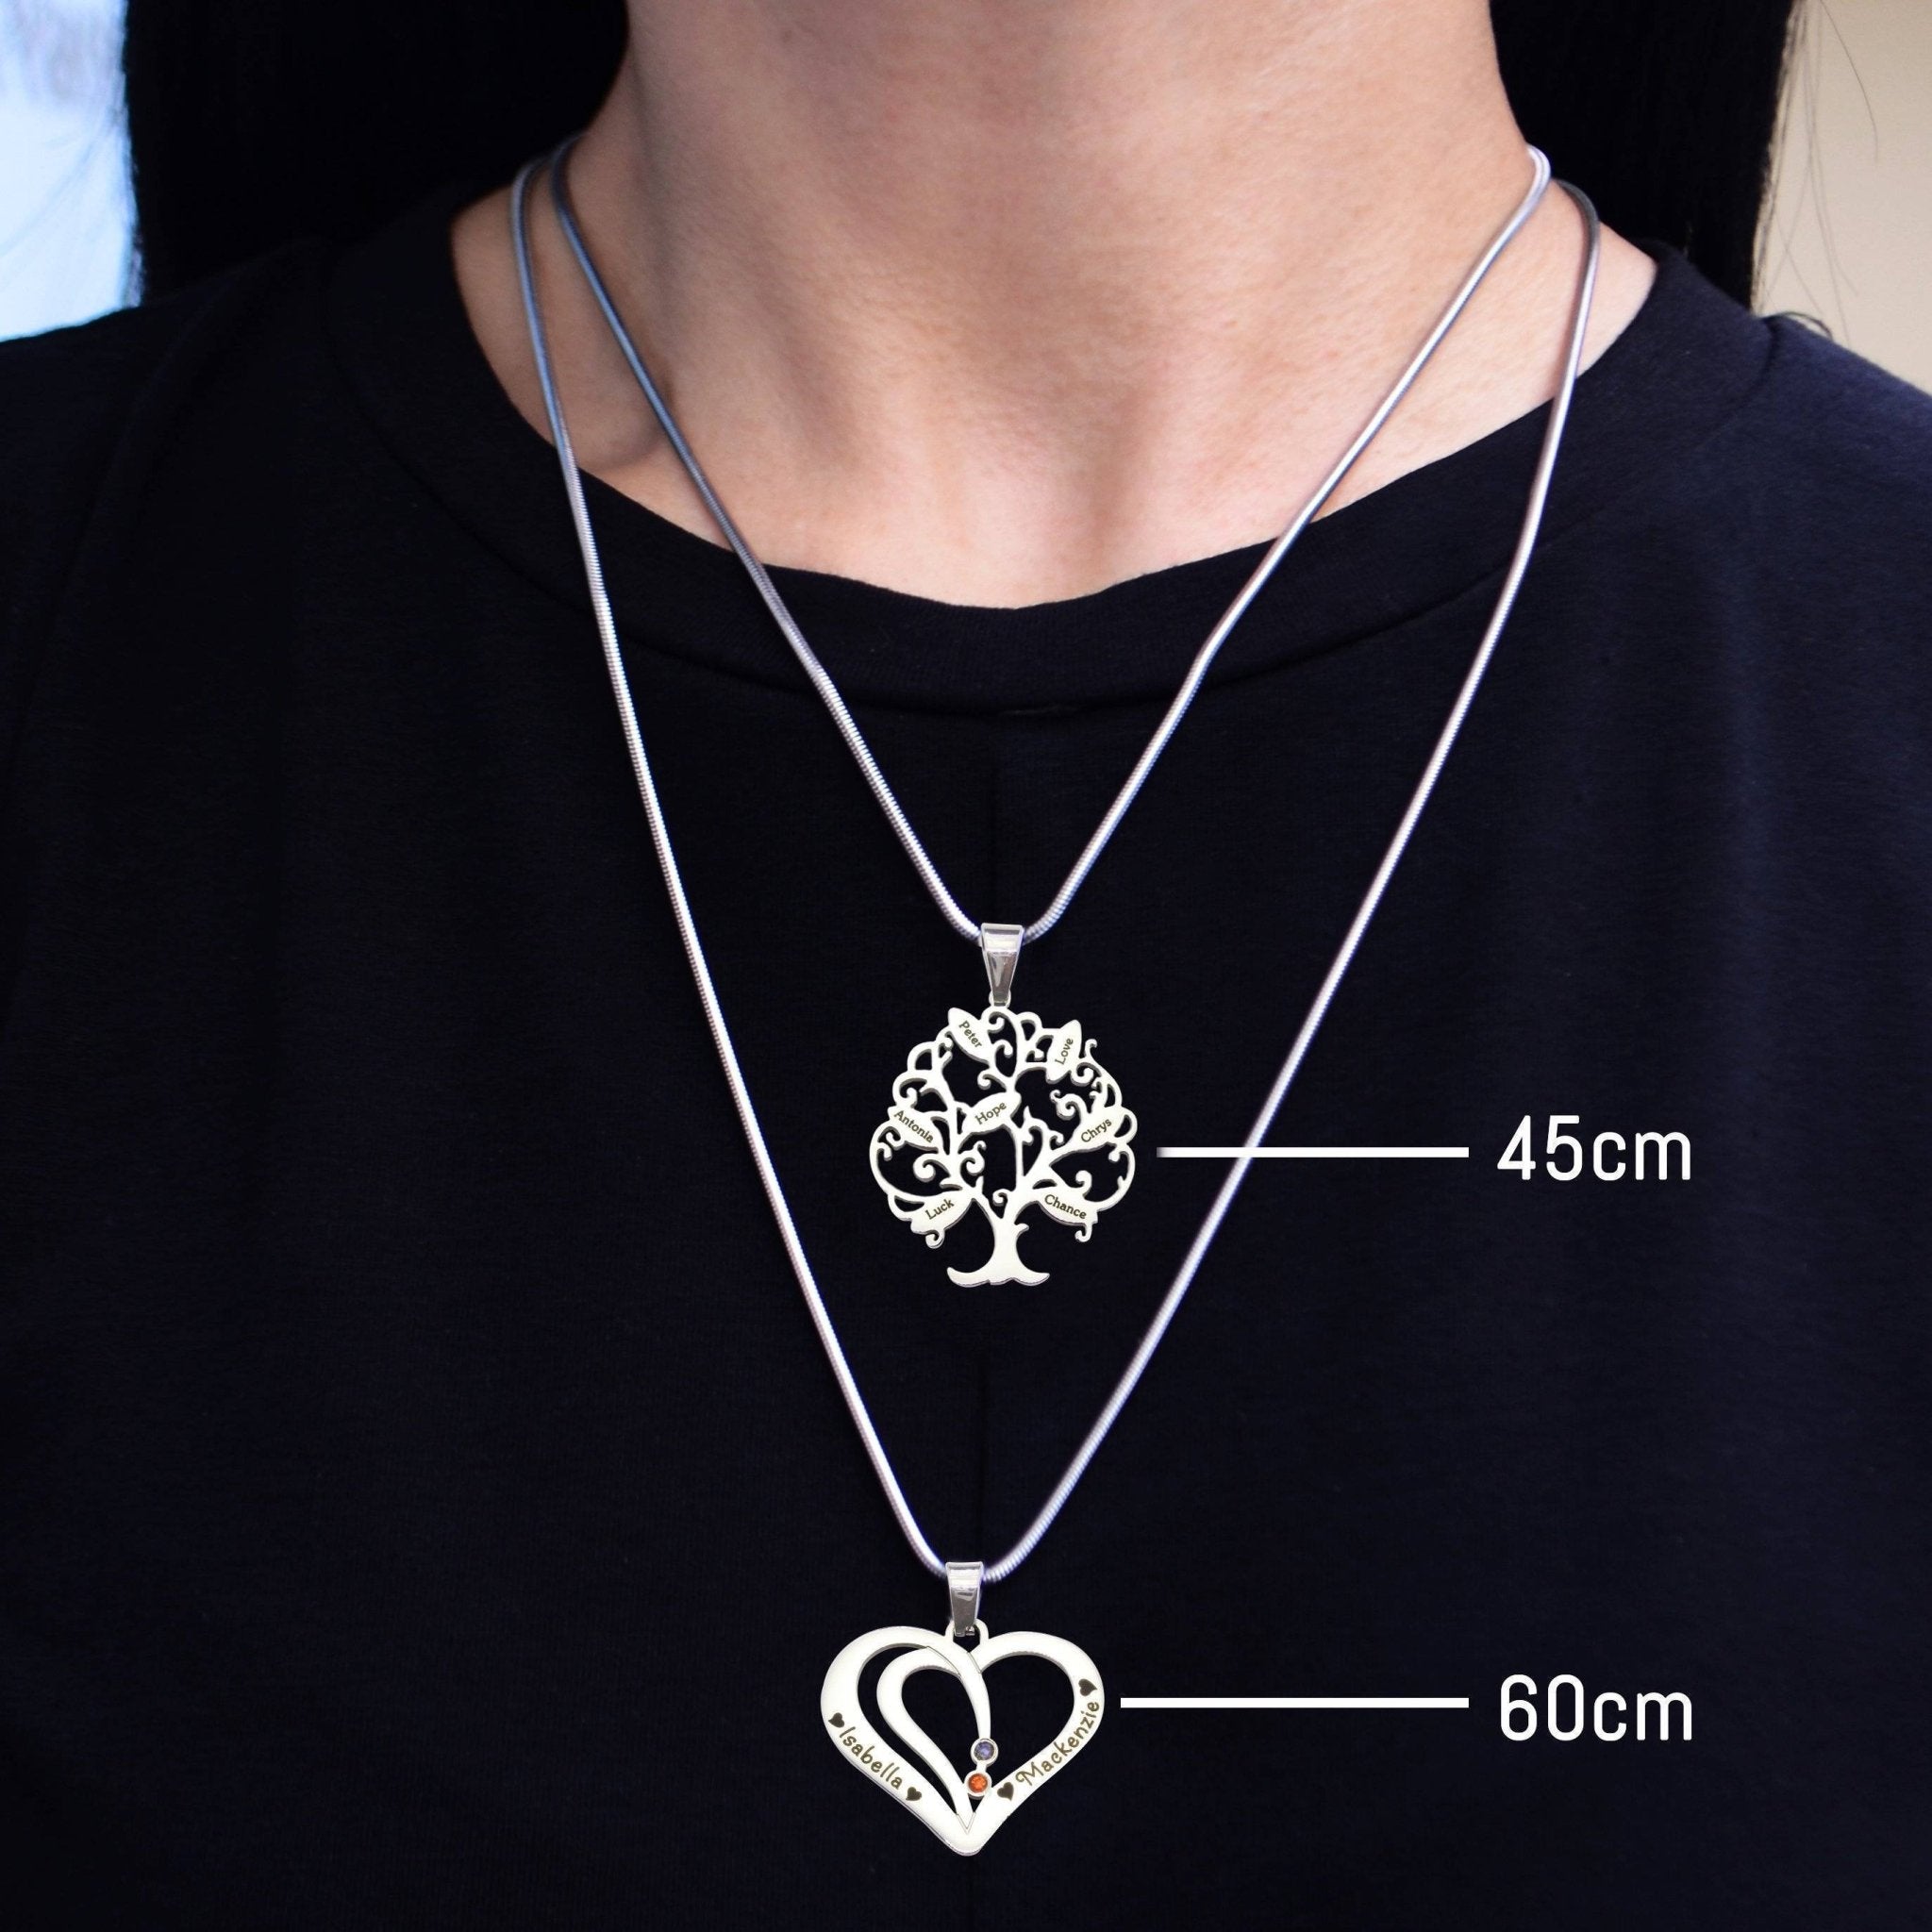 Heart of Hope Necklace - Mothers Jewellery by Belle Fever